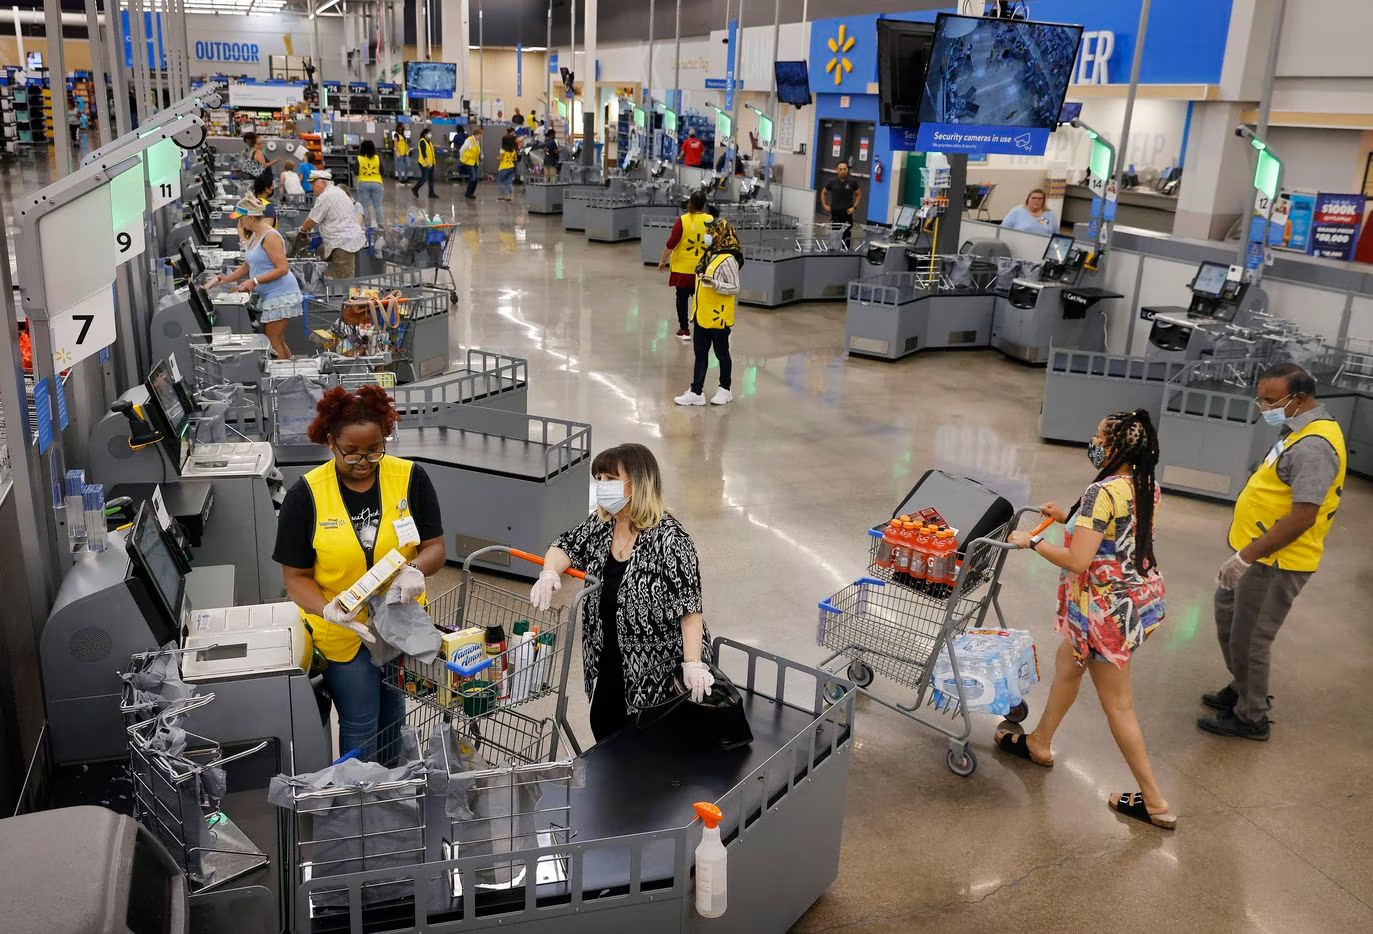 Walmart Announces Plans To Switch Out Self-Checkout Equipment